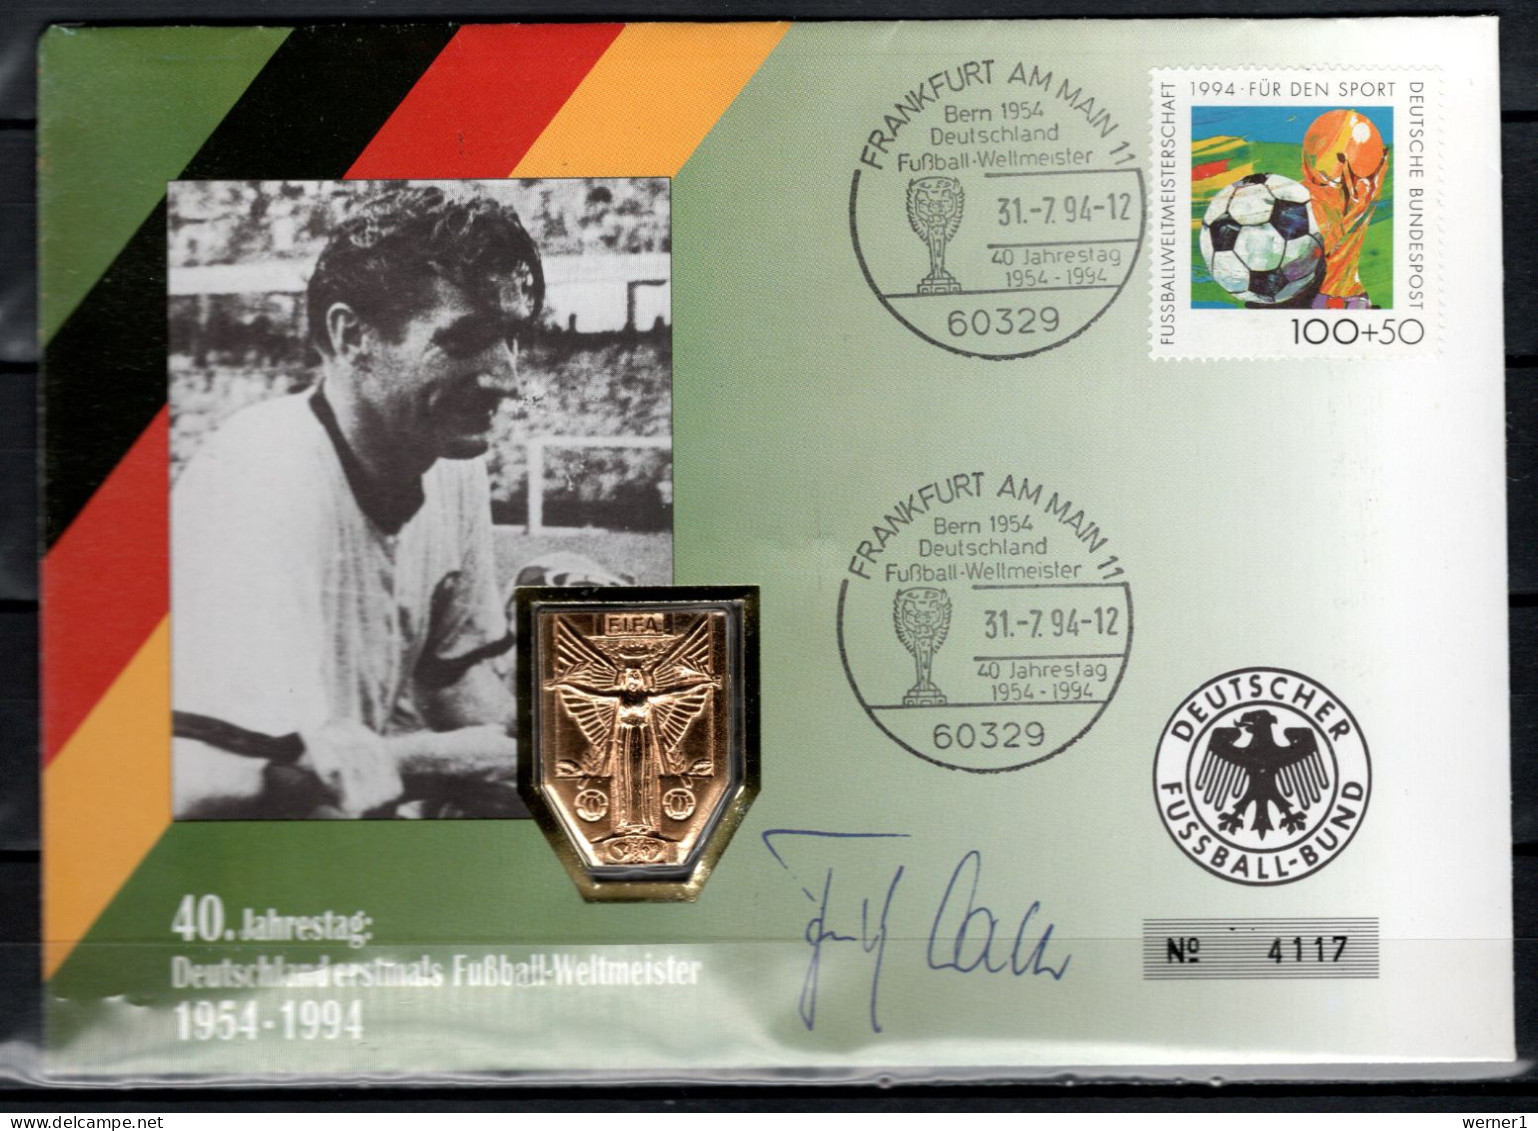 Germany 1994 Football Soccer World Cup Commemorative Cover With Medal And Original Signature Of Fritz Walter - 1994 – USA